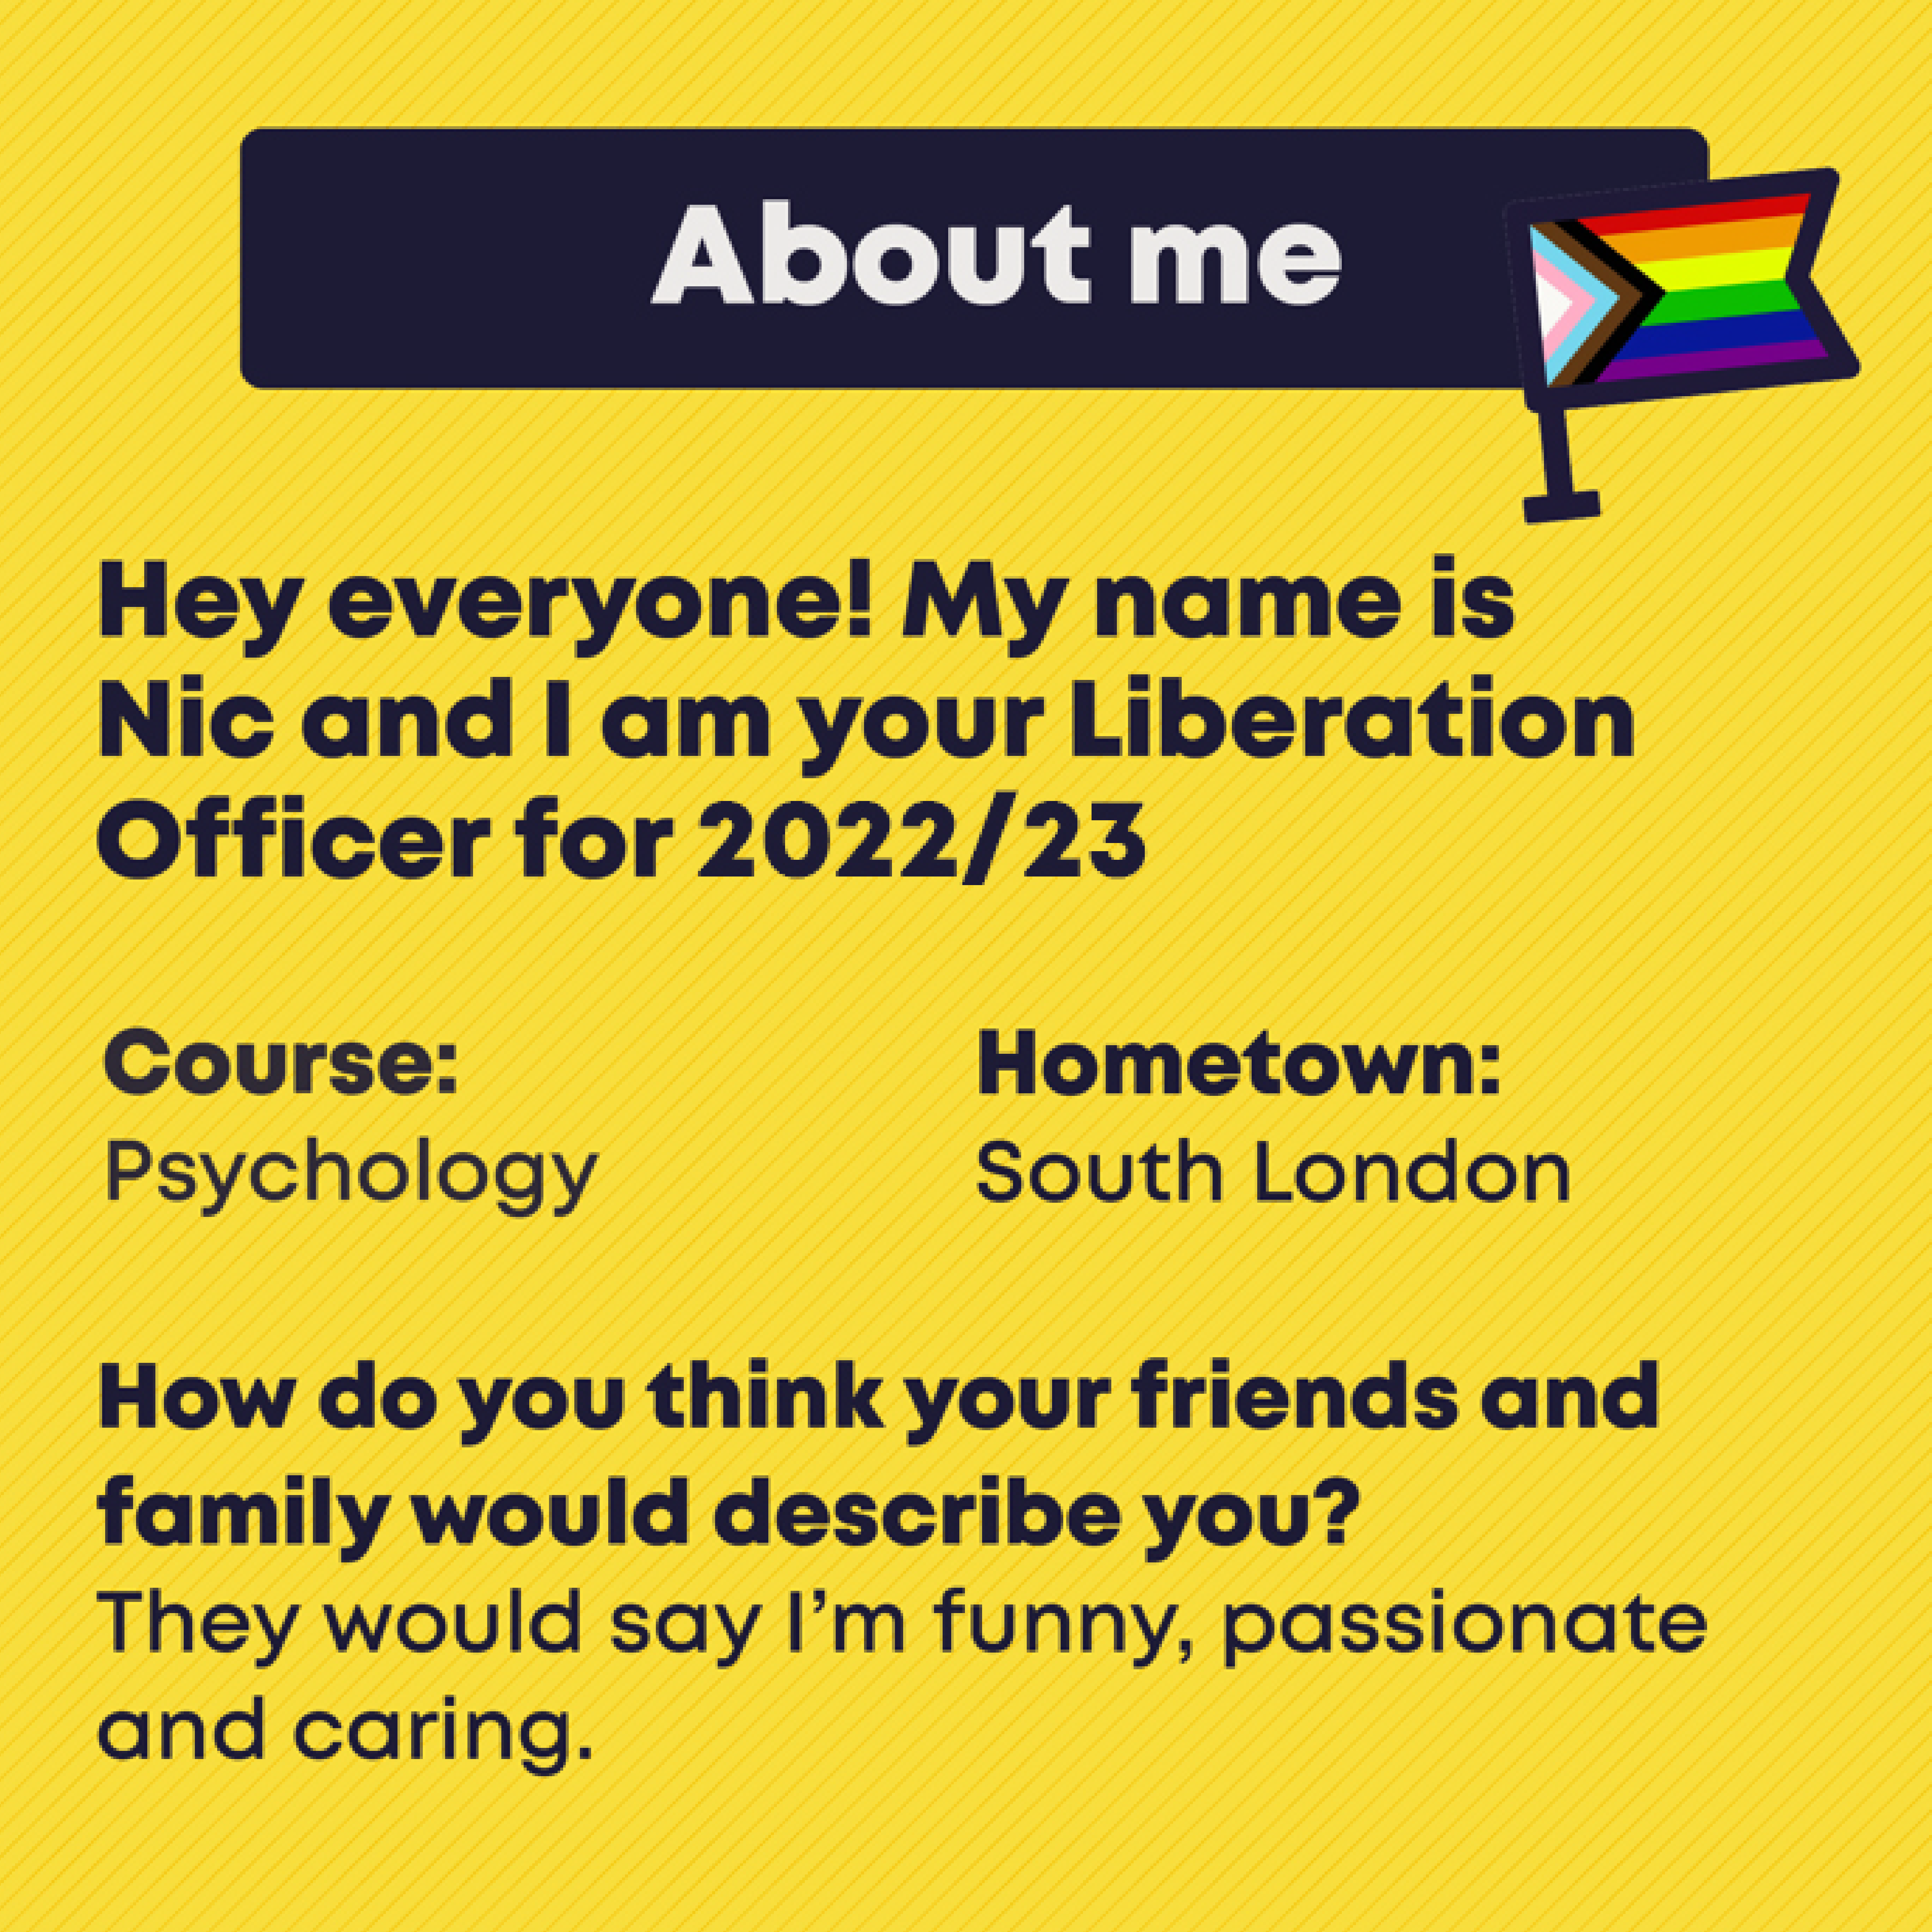 About me. Hey everyone! My name is  Nic and I am your Liberation Officer for 2022/23. Course: Psychology. Hometown: South London. How do you think your friends and family would describe you? They would say I’m funny, passionate and caring.